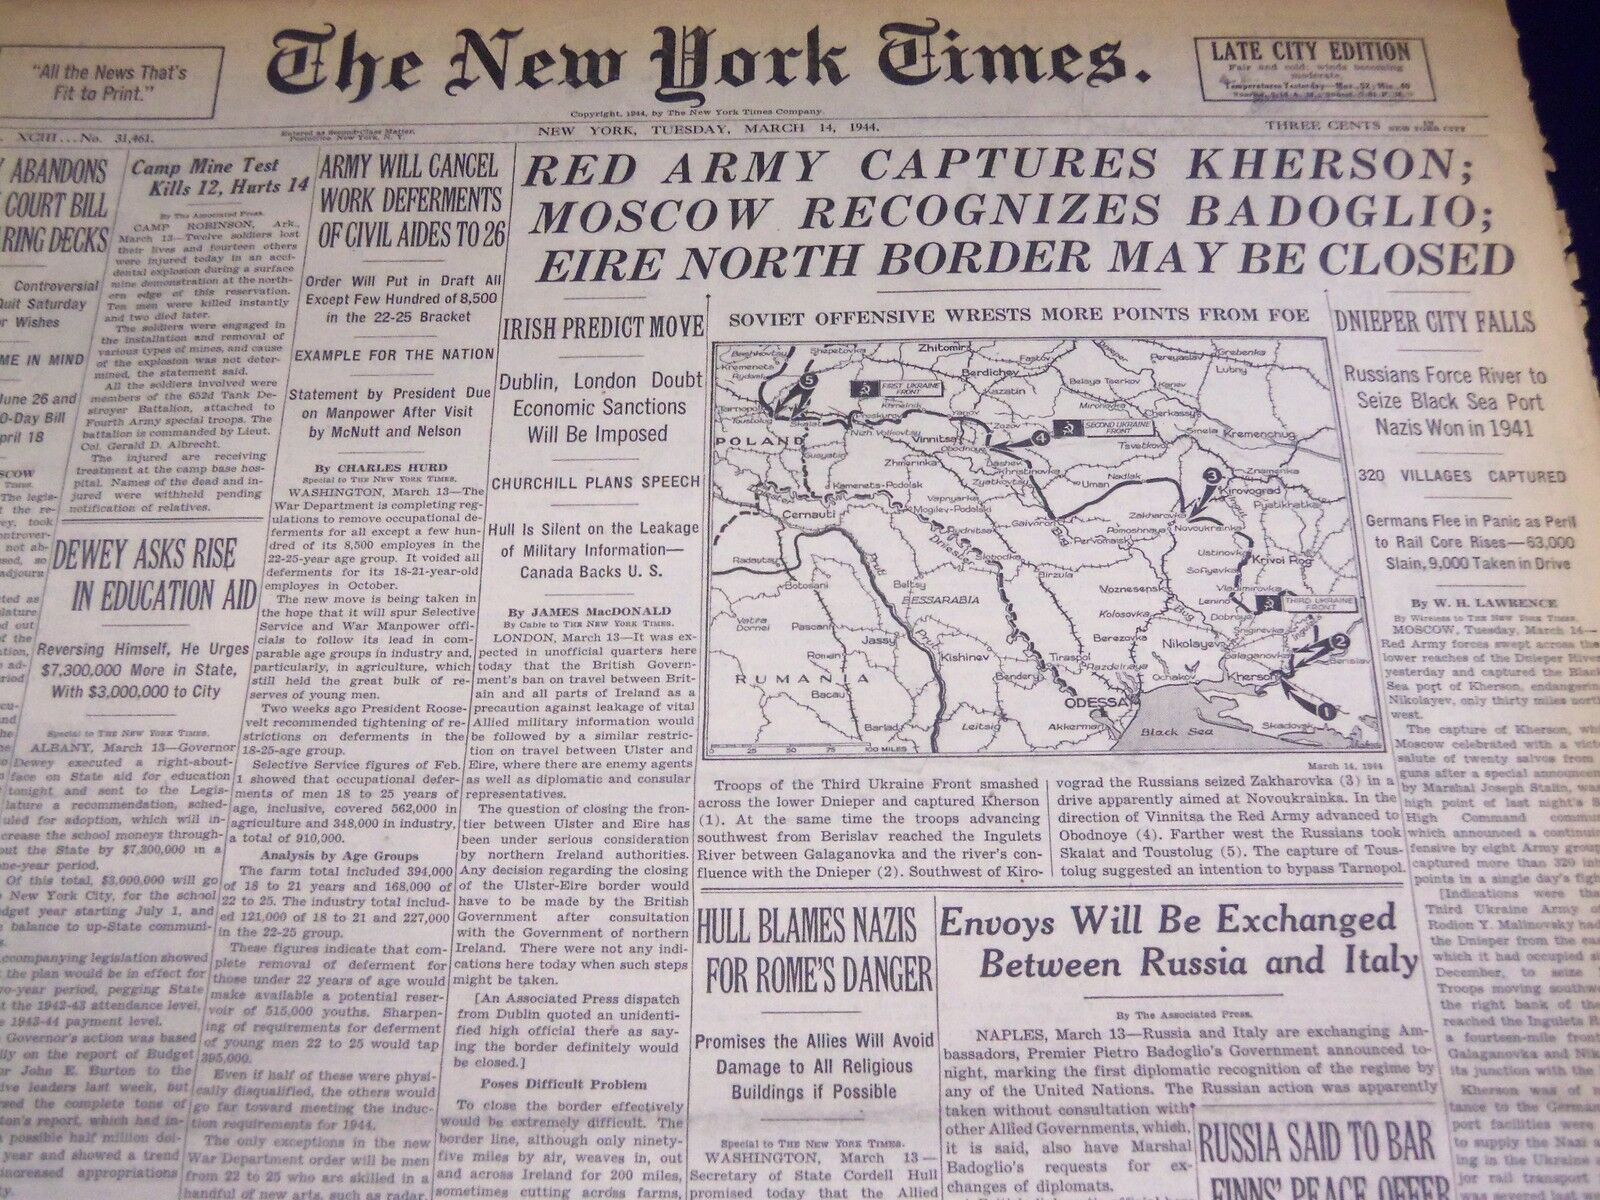 1944 MARCH 14 NEW YORK TIMES - MOSCOW RECOGNIZES BADOGLIO - NT 3729